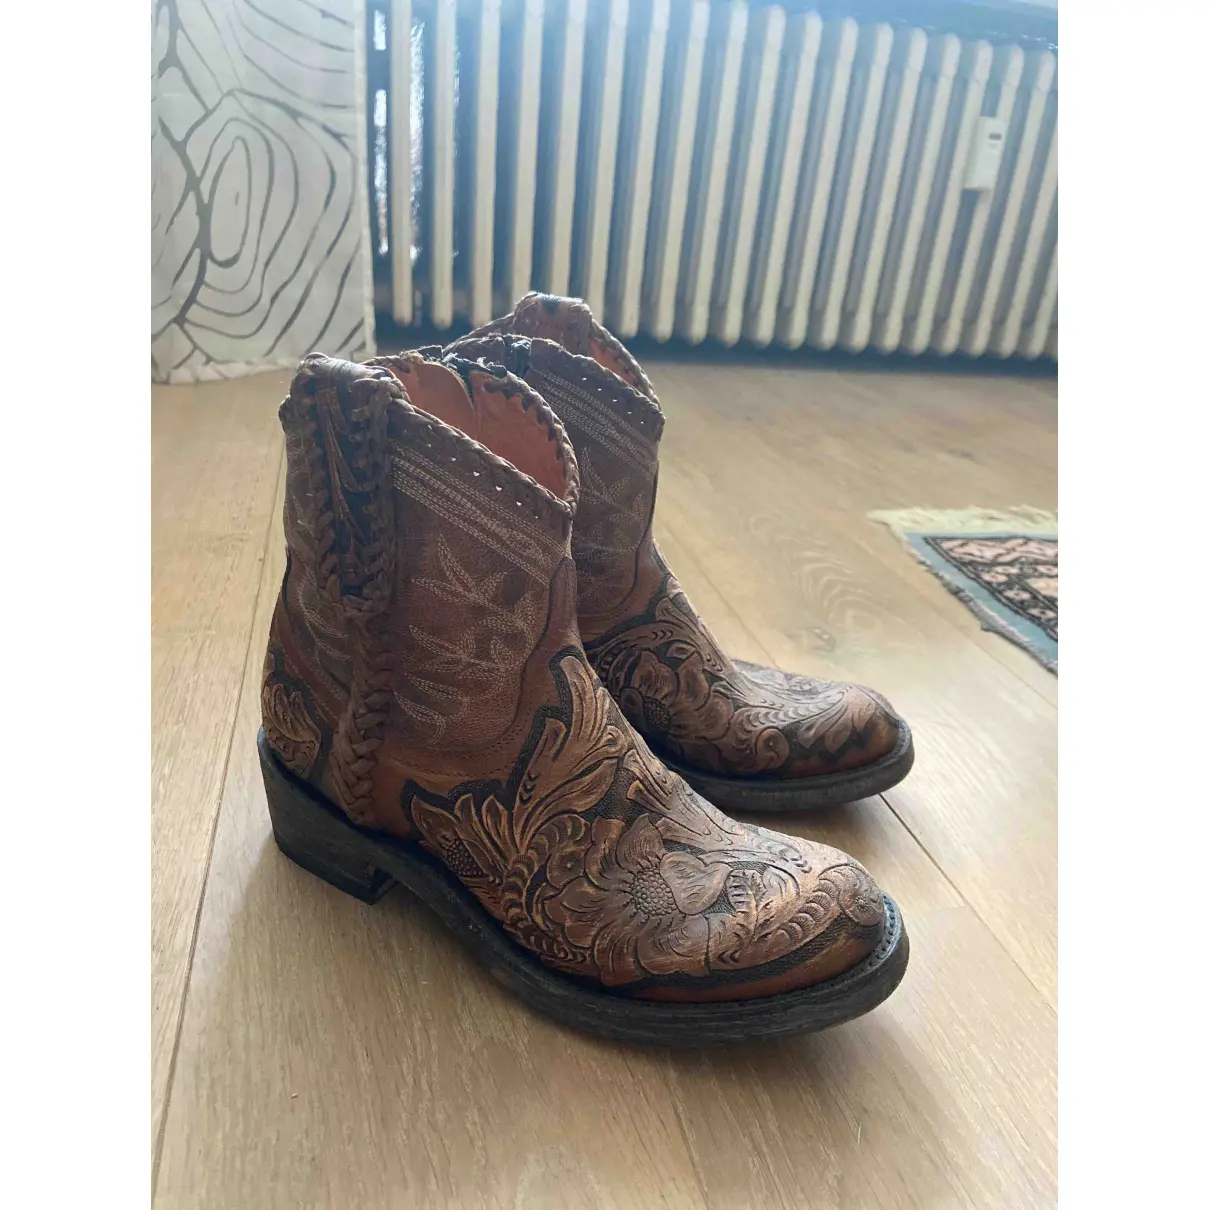 Buy Old Gringo Leather western boots online